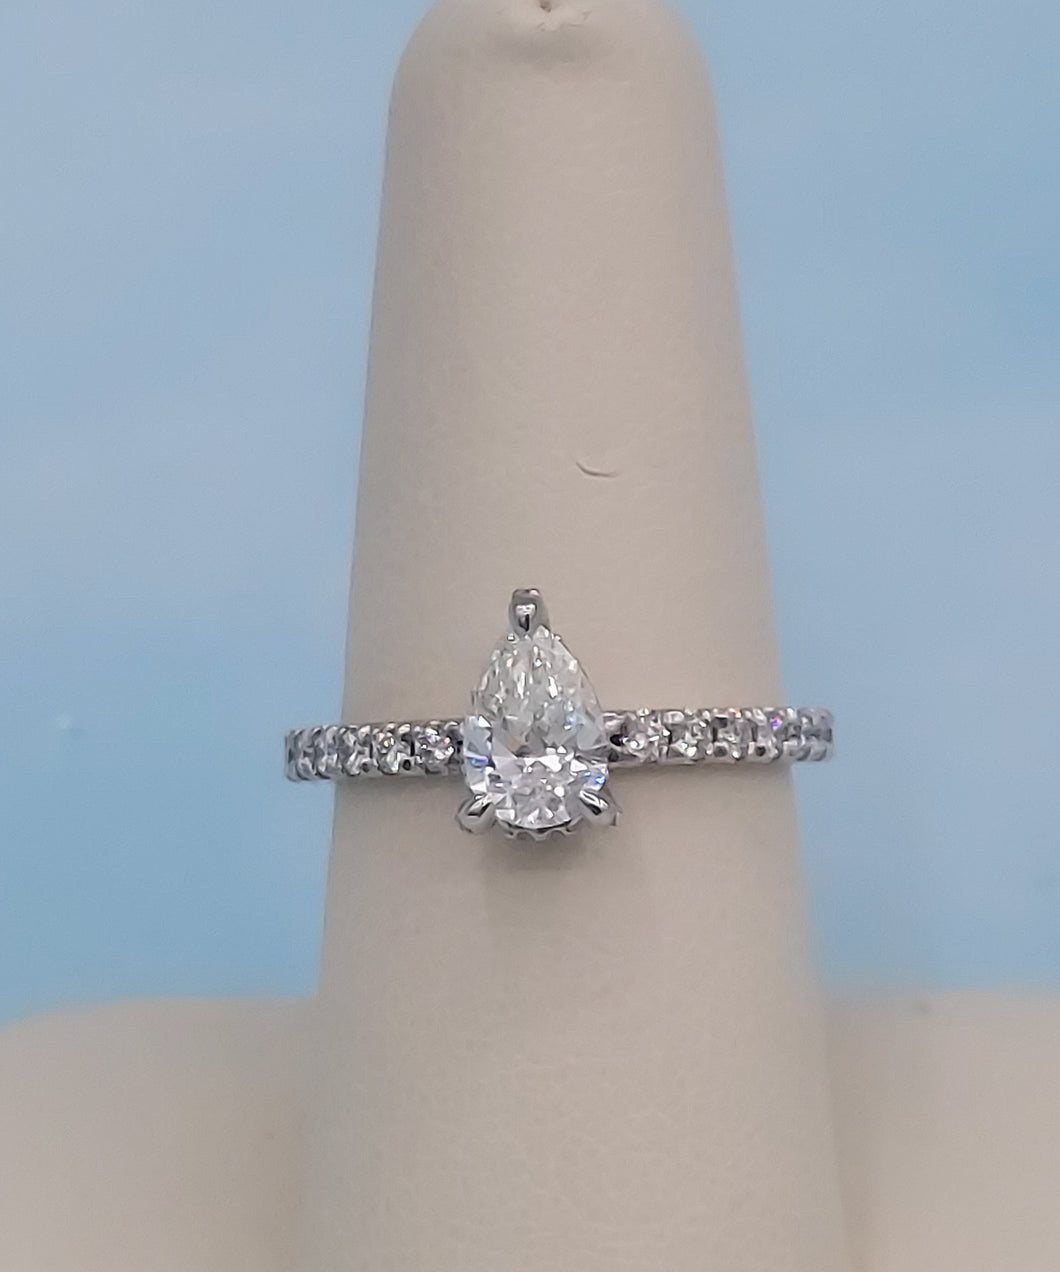 .92 Carat Pear Shaped Engagement Ring with Diamond Band - 14K White Gold